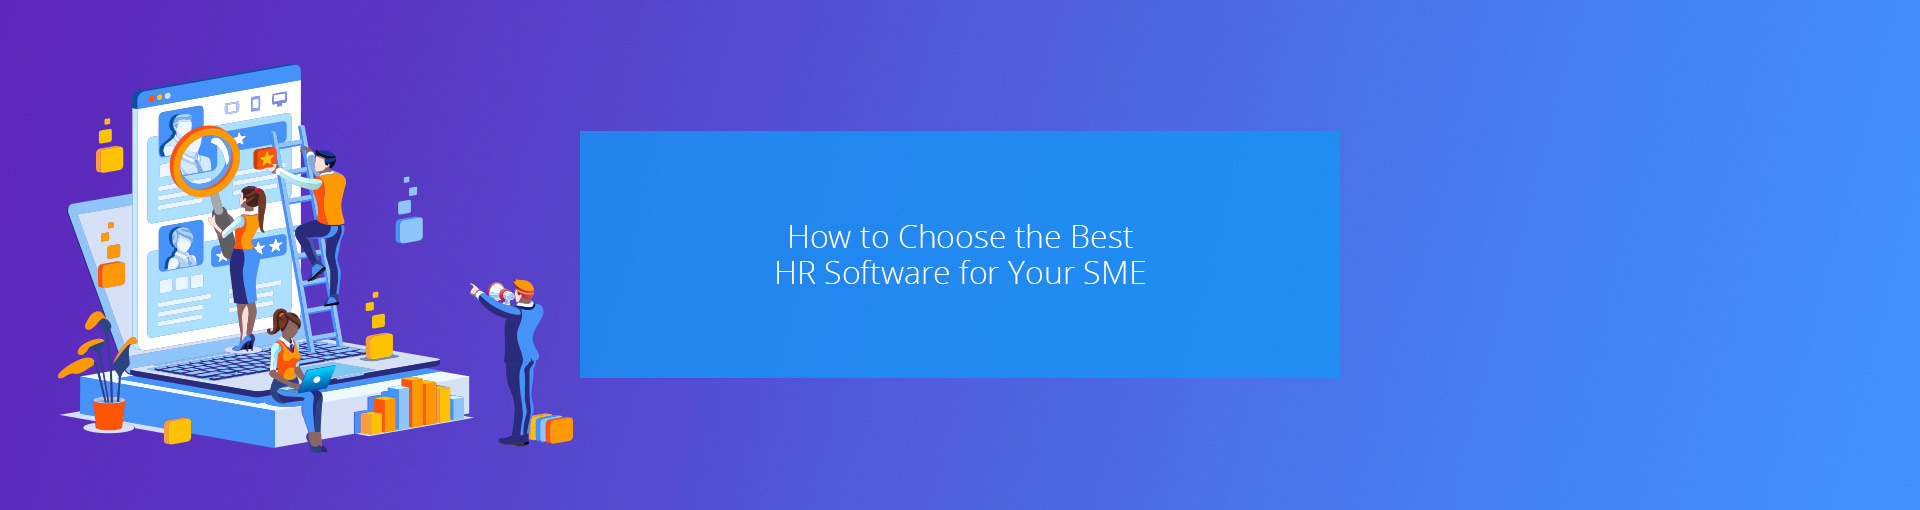 How to Choose the Best HR Software for Your SME Featured Image